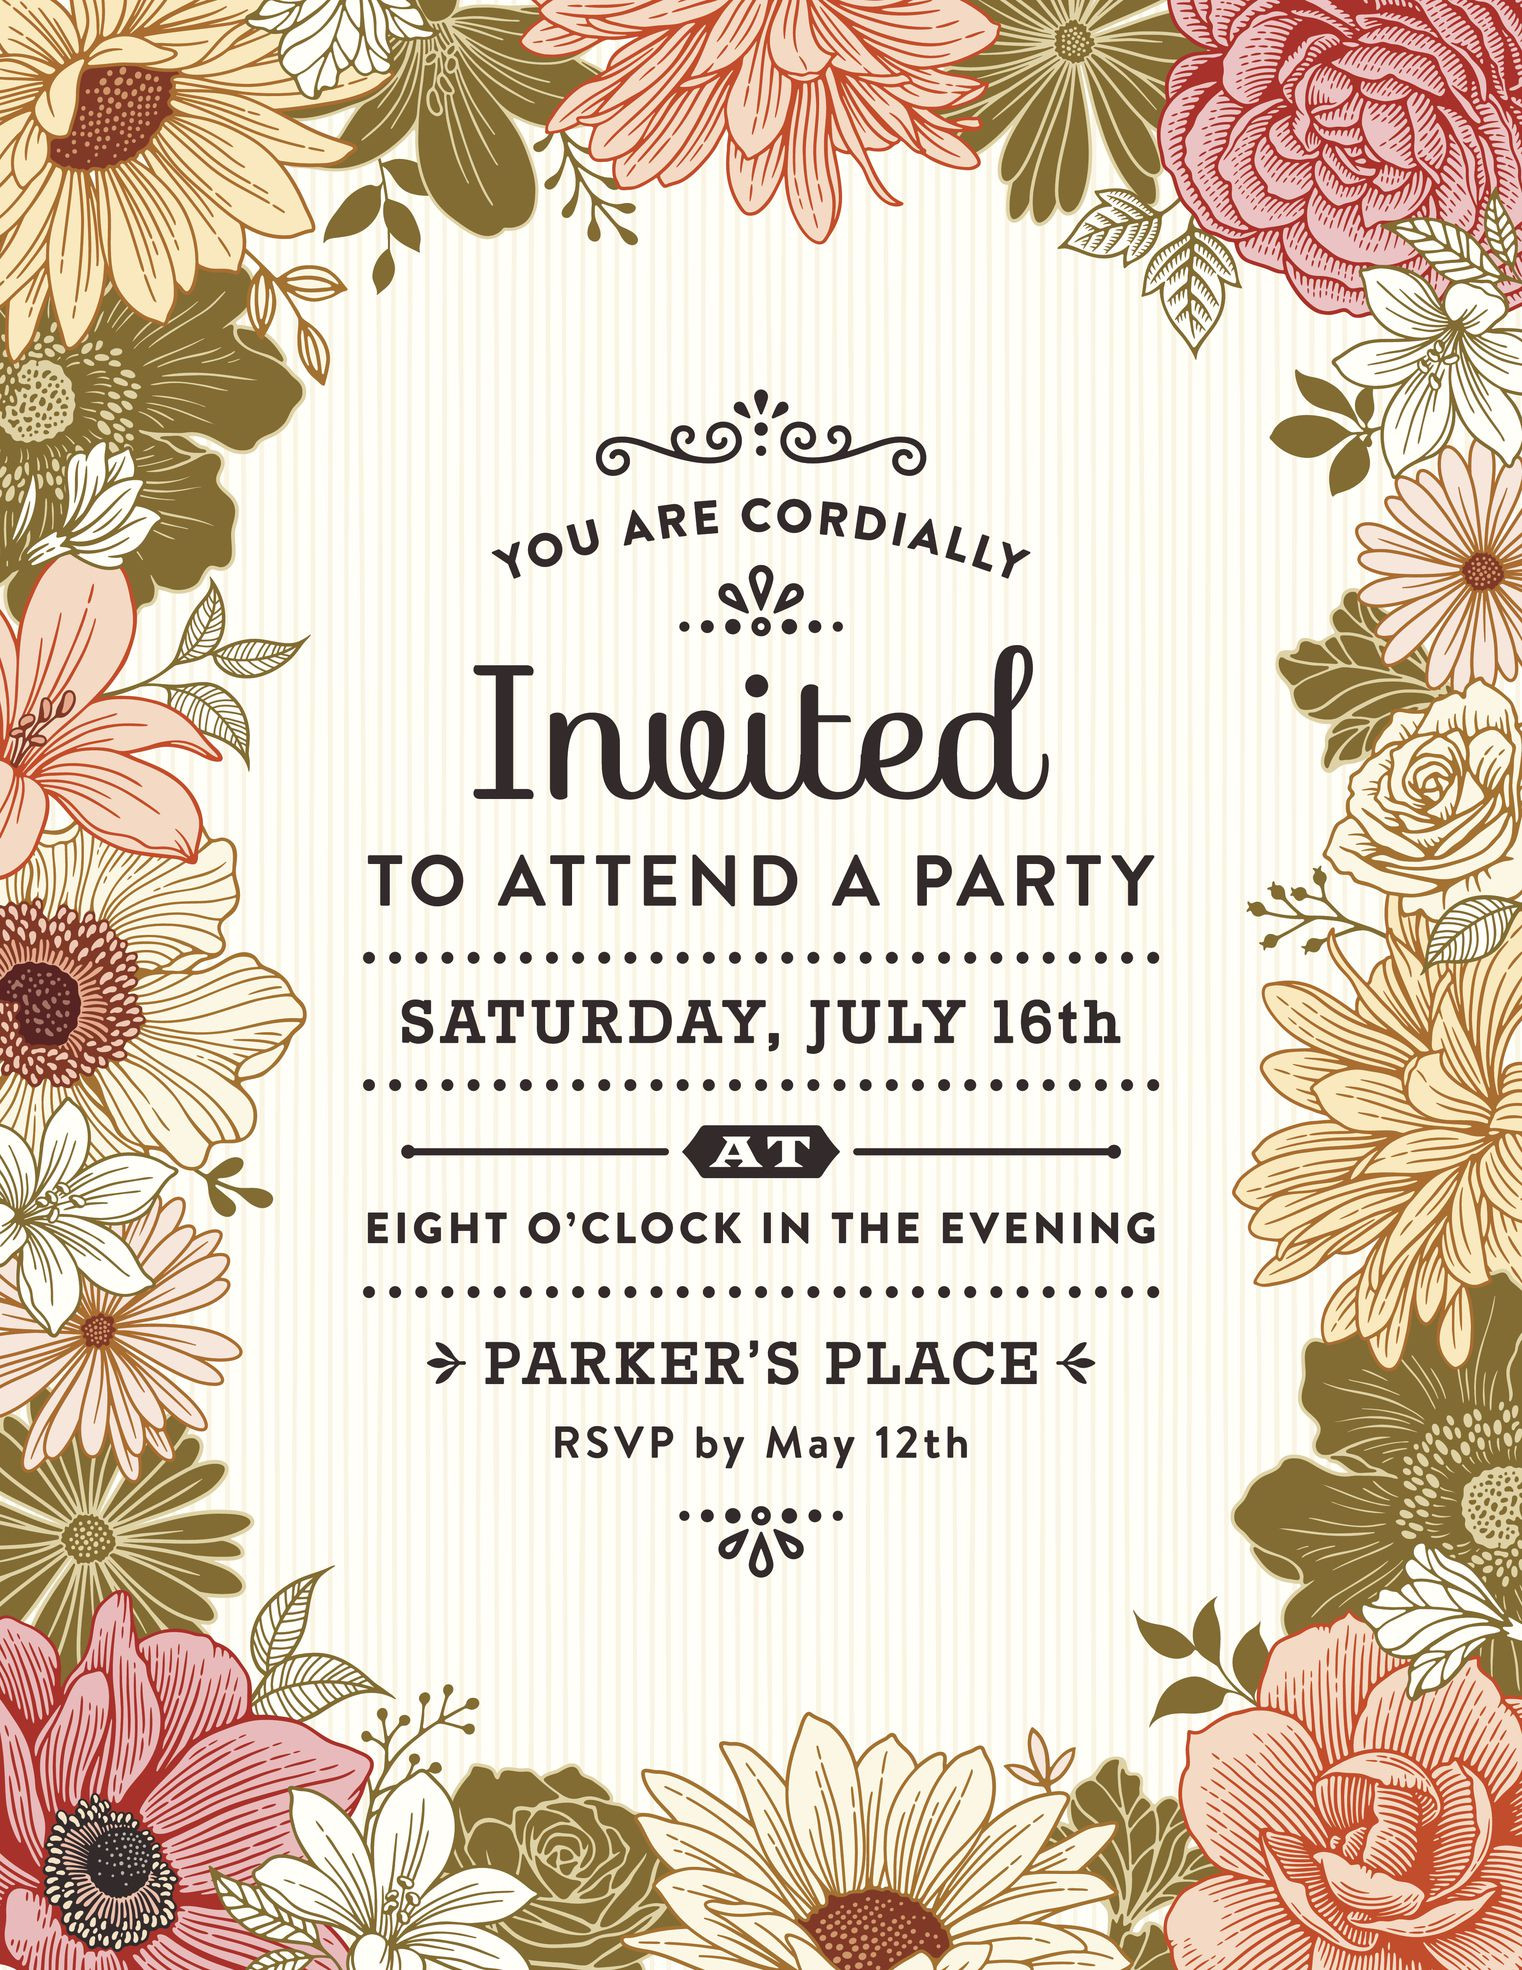 How To Write A Birthday Invitation
 How to Write a Party Invitation